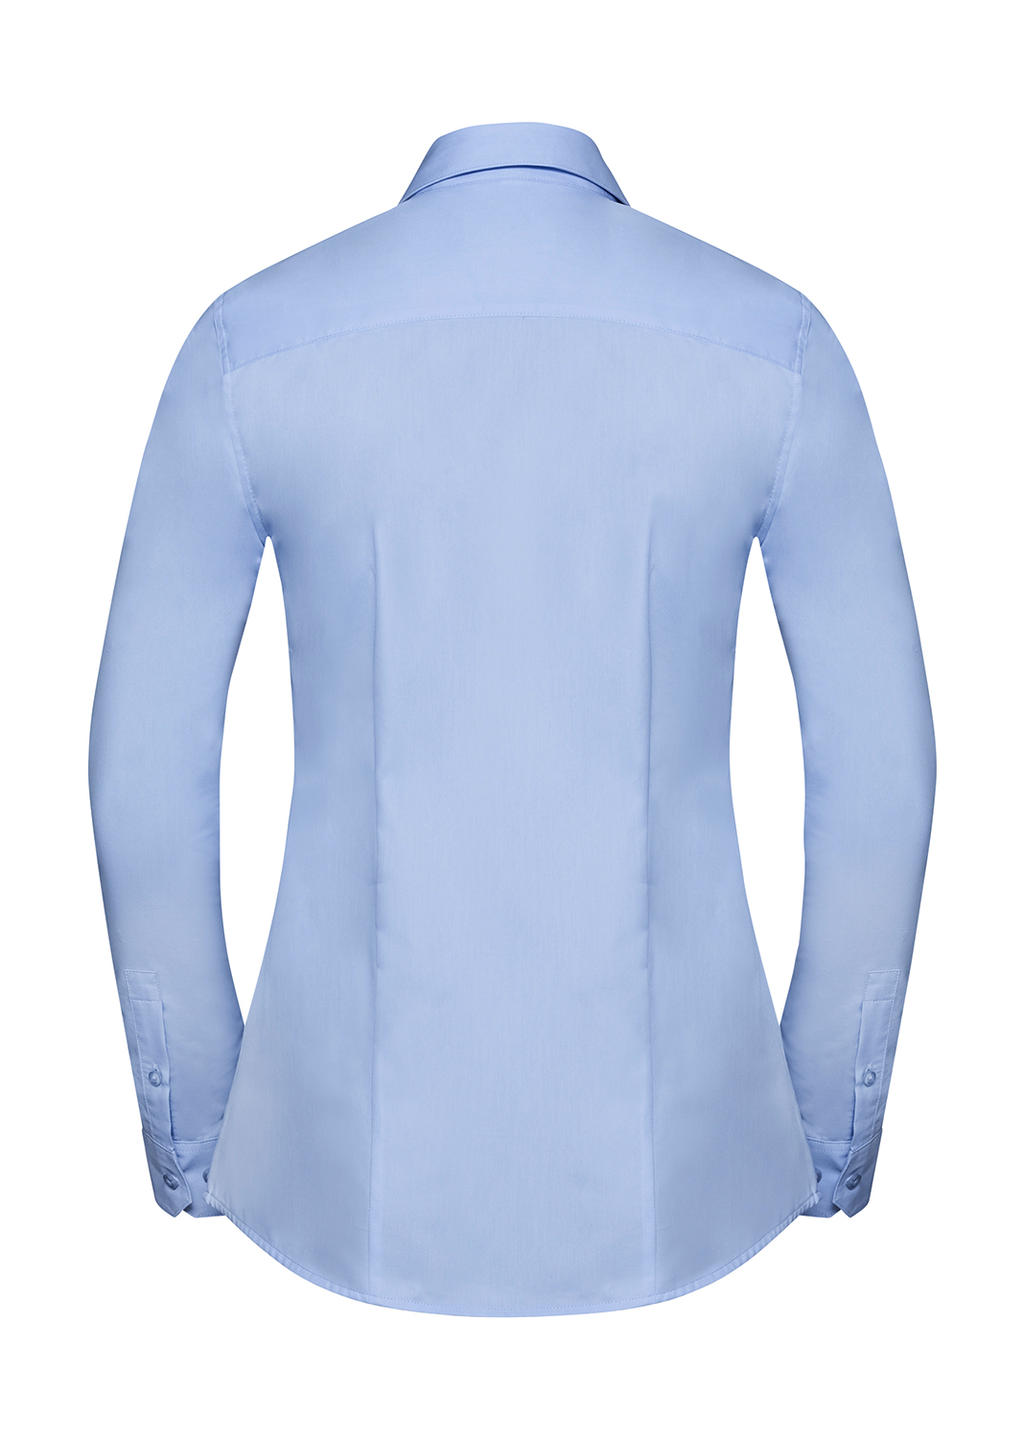  Ladies LS Tailored Coolmax? Shirt in Farbe White